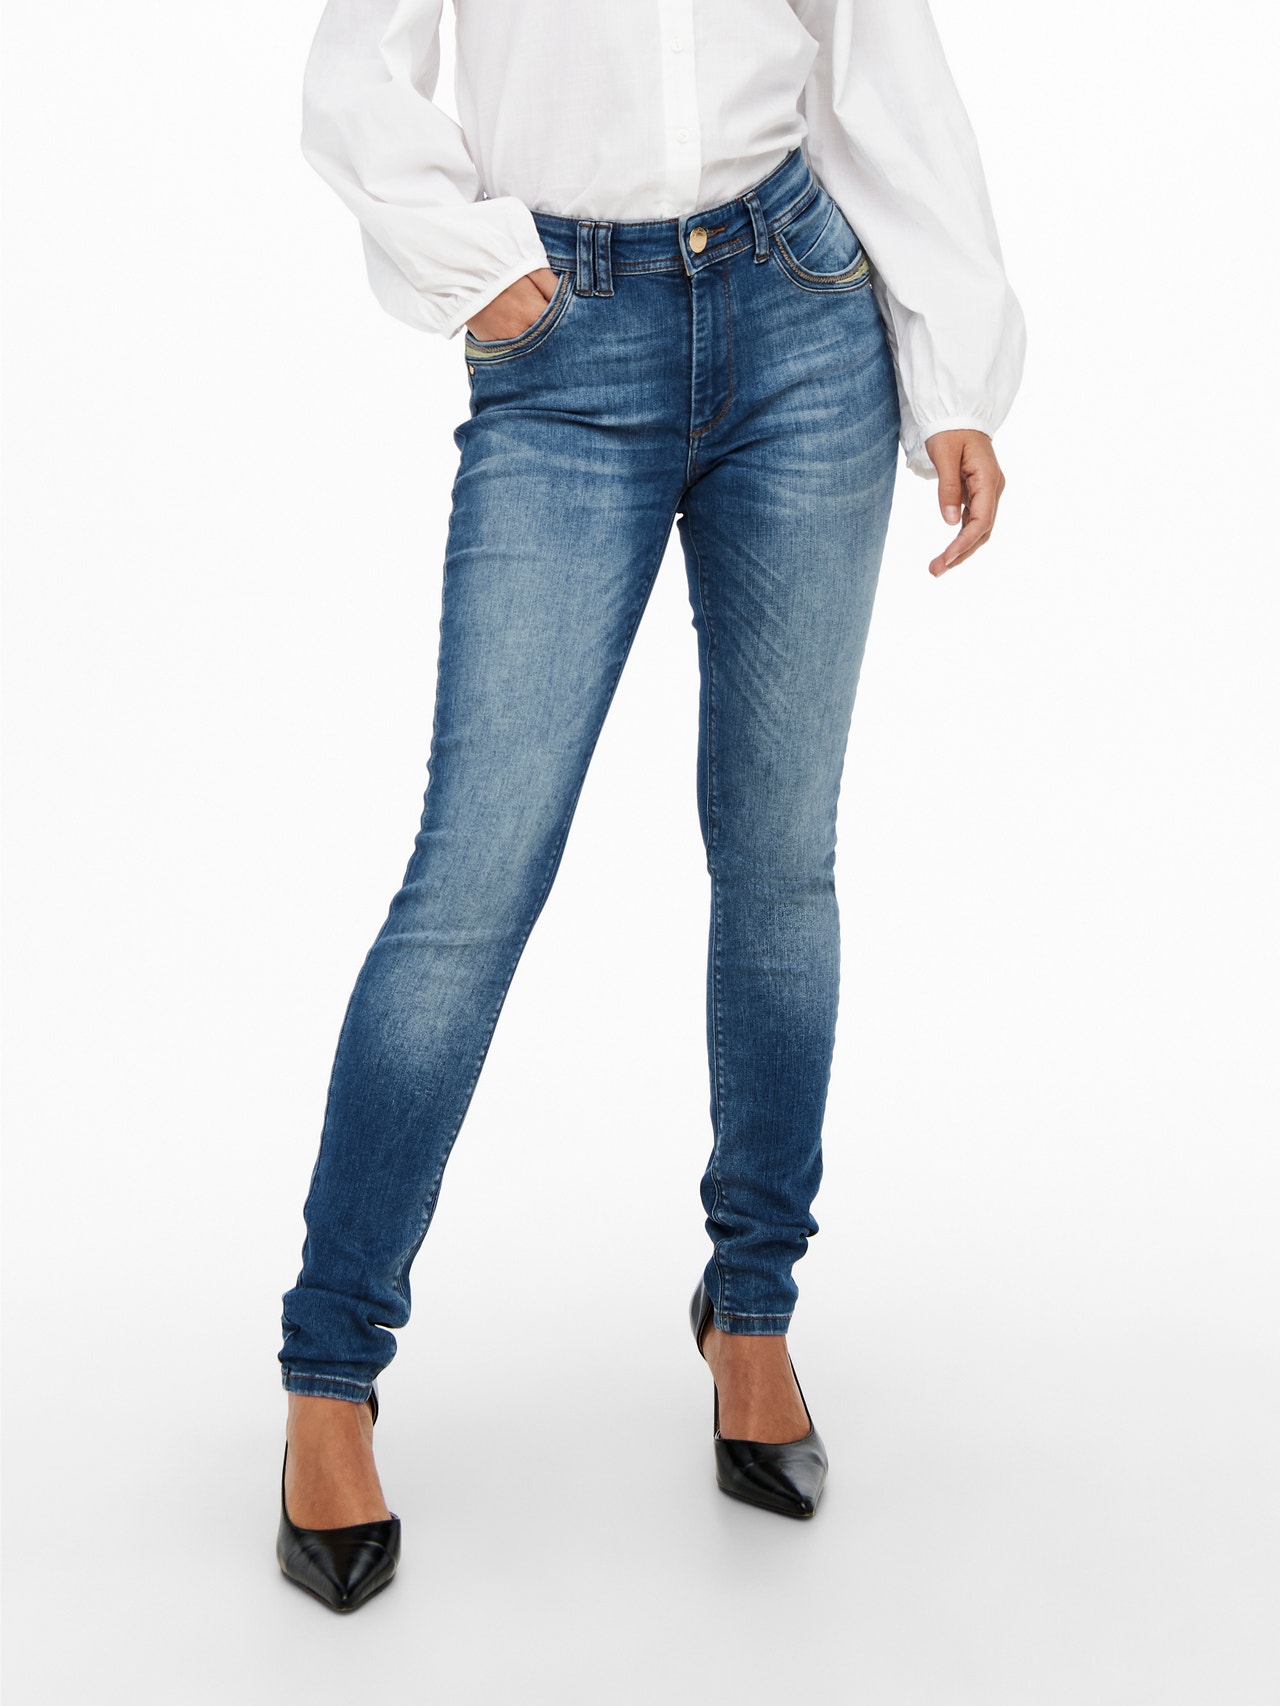 ONLY ONLSTACY LIFE Mid Waist SKinny LOW ANKLE Jeans -Medium Blue Denim - 15245452